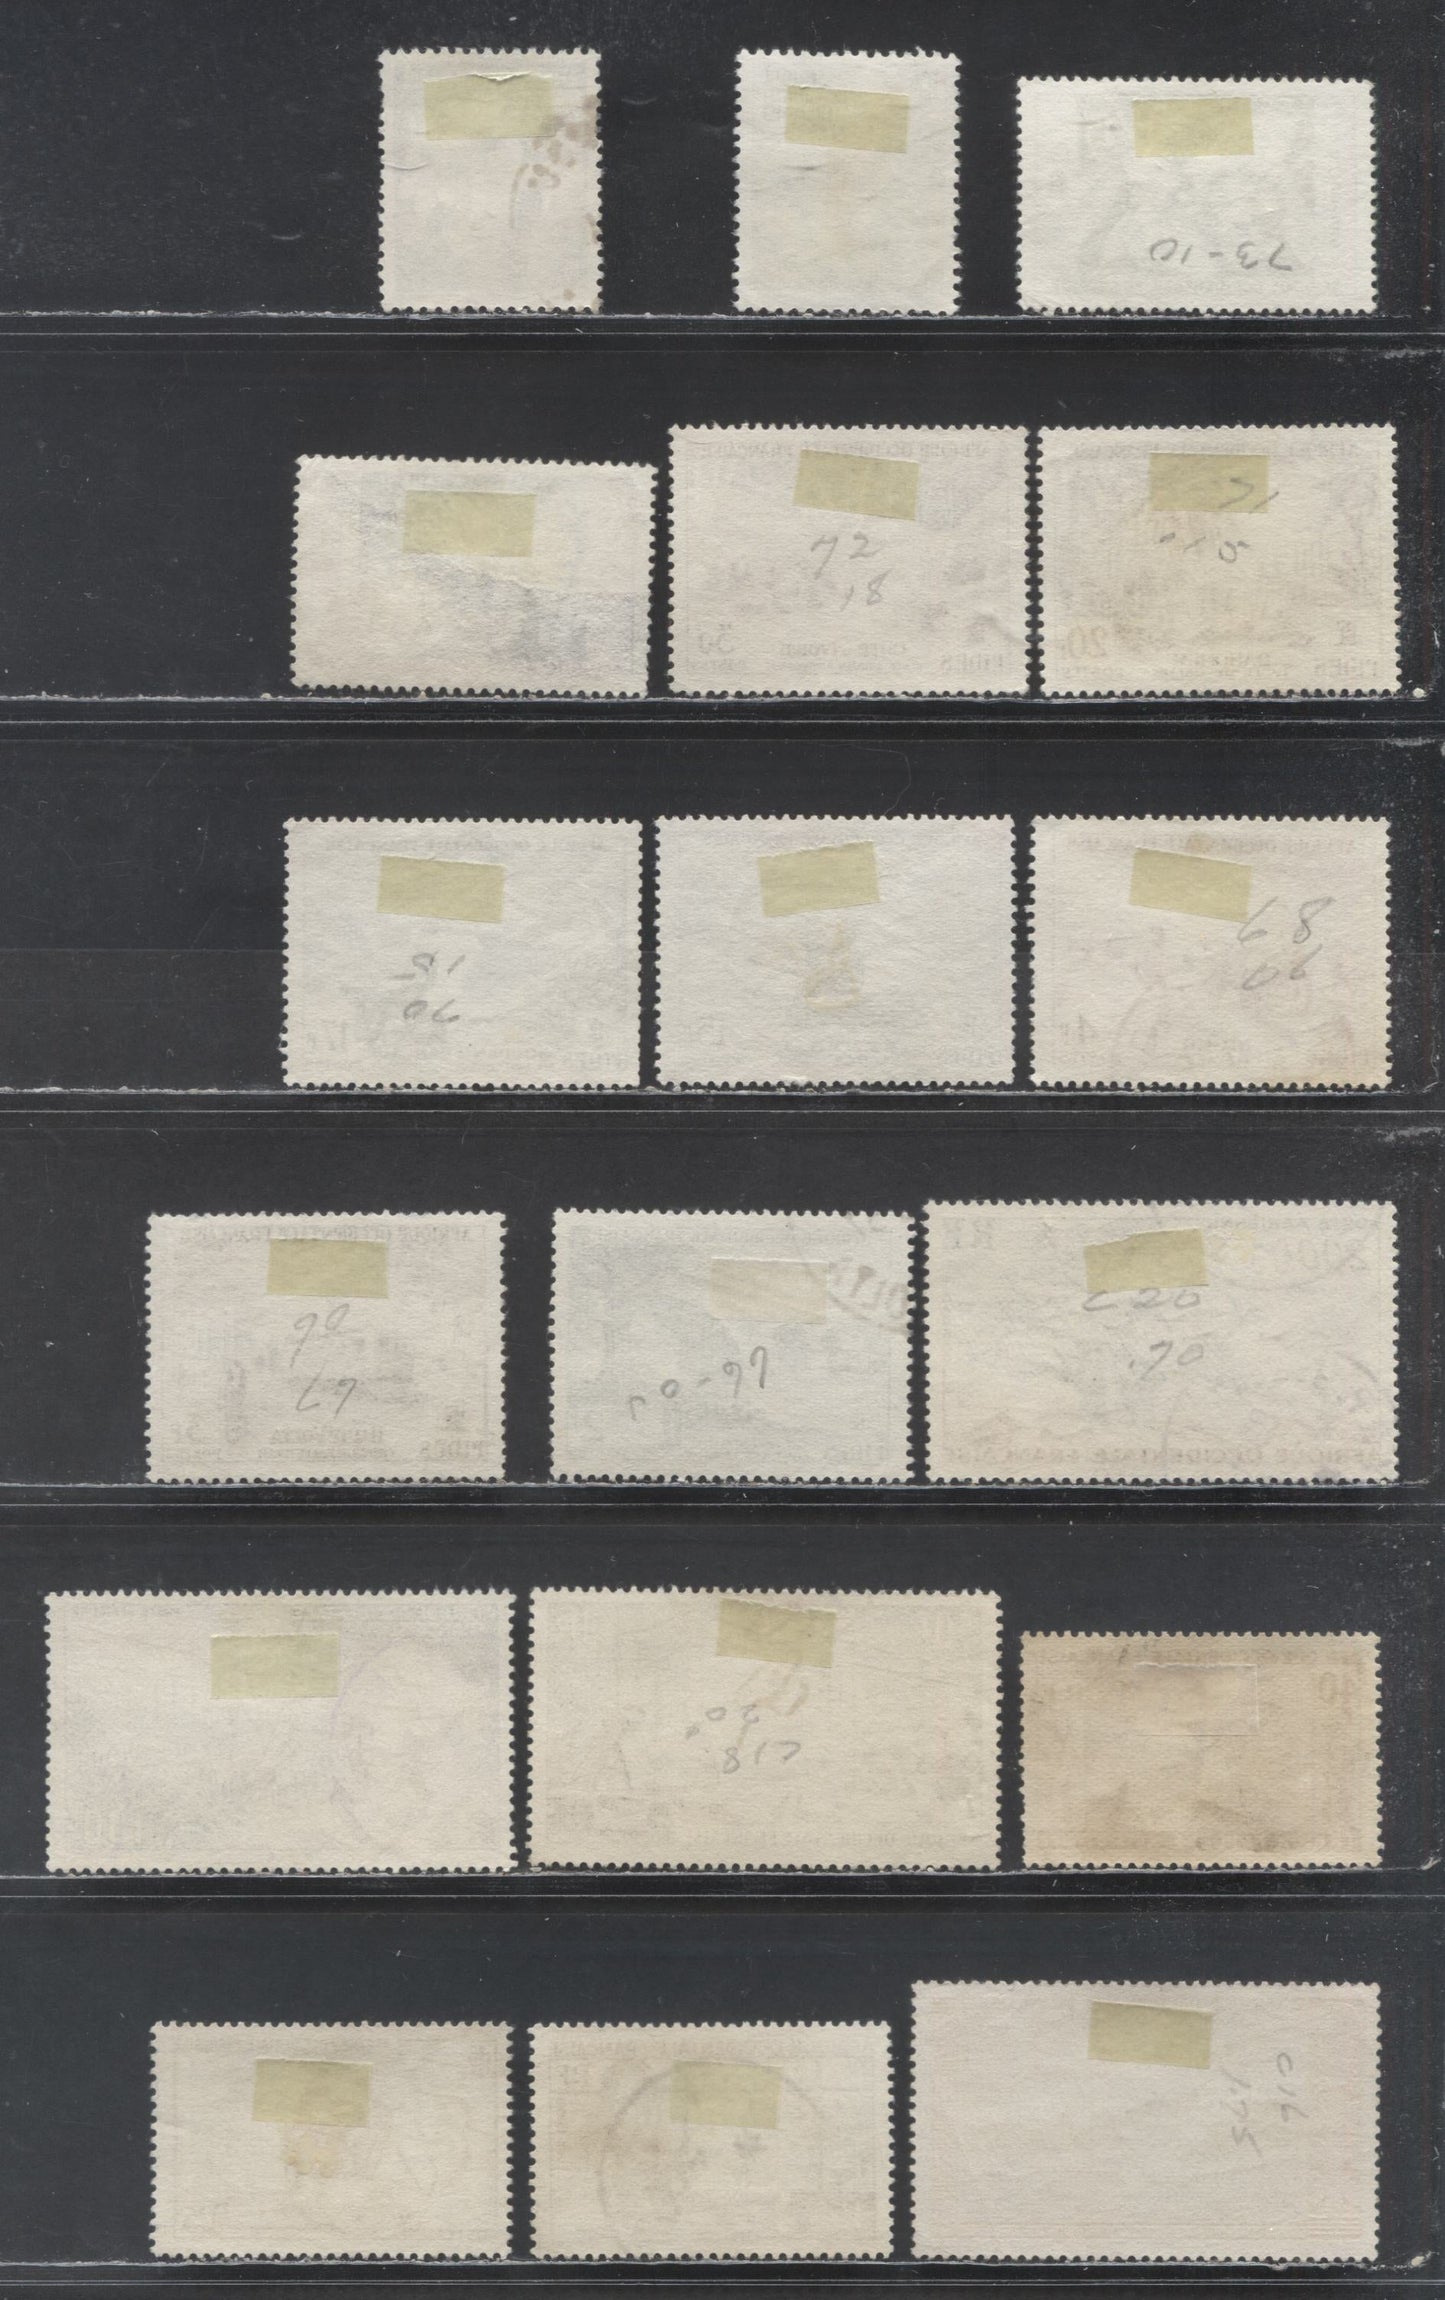 Lot 4 French West Africa SC#58/C20 1952-1954 Taplene - Airmail Issues, 18 Very Fine Used Singles, Click on Listing to See ALL Pictures, 2022 Scott Cat. $20.4